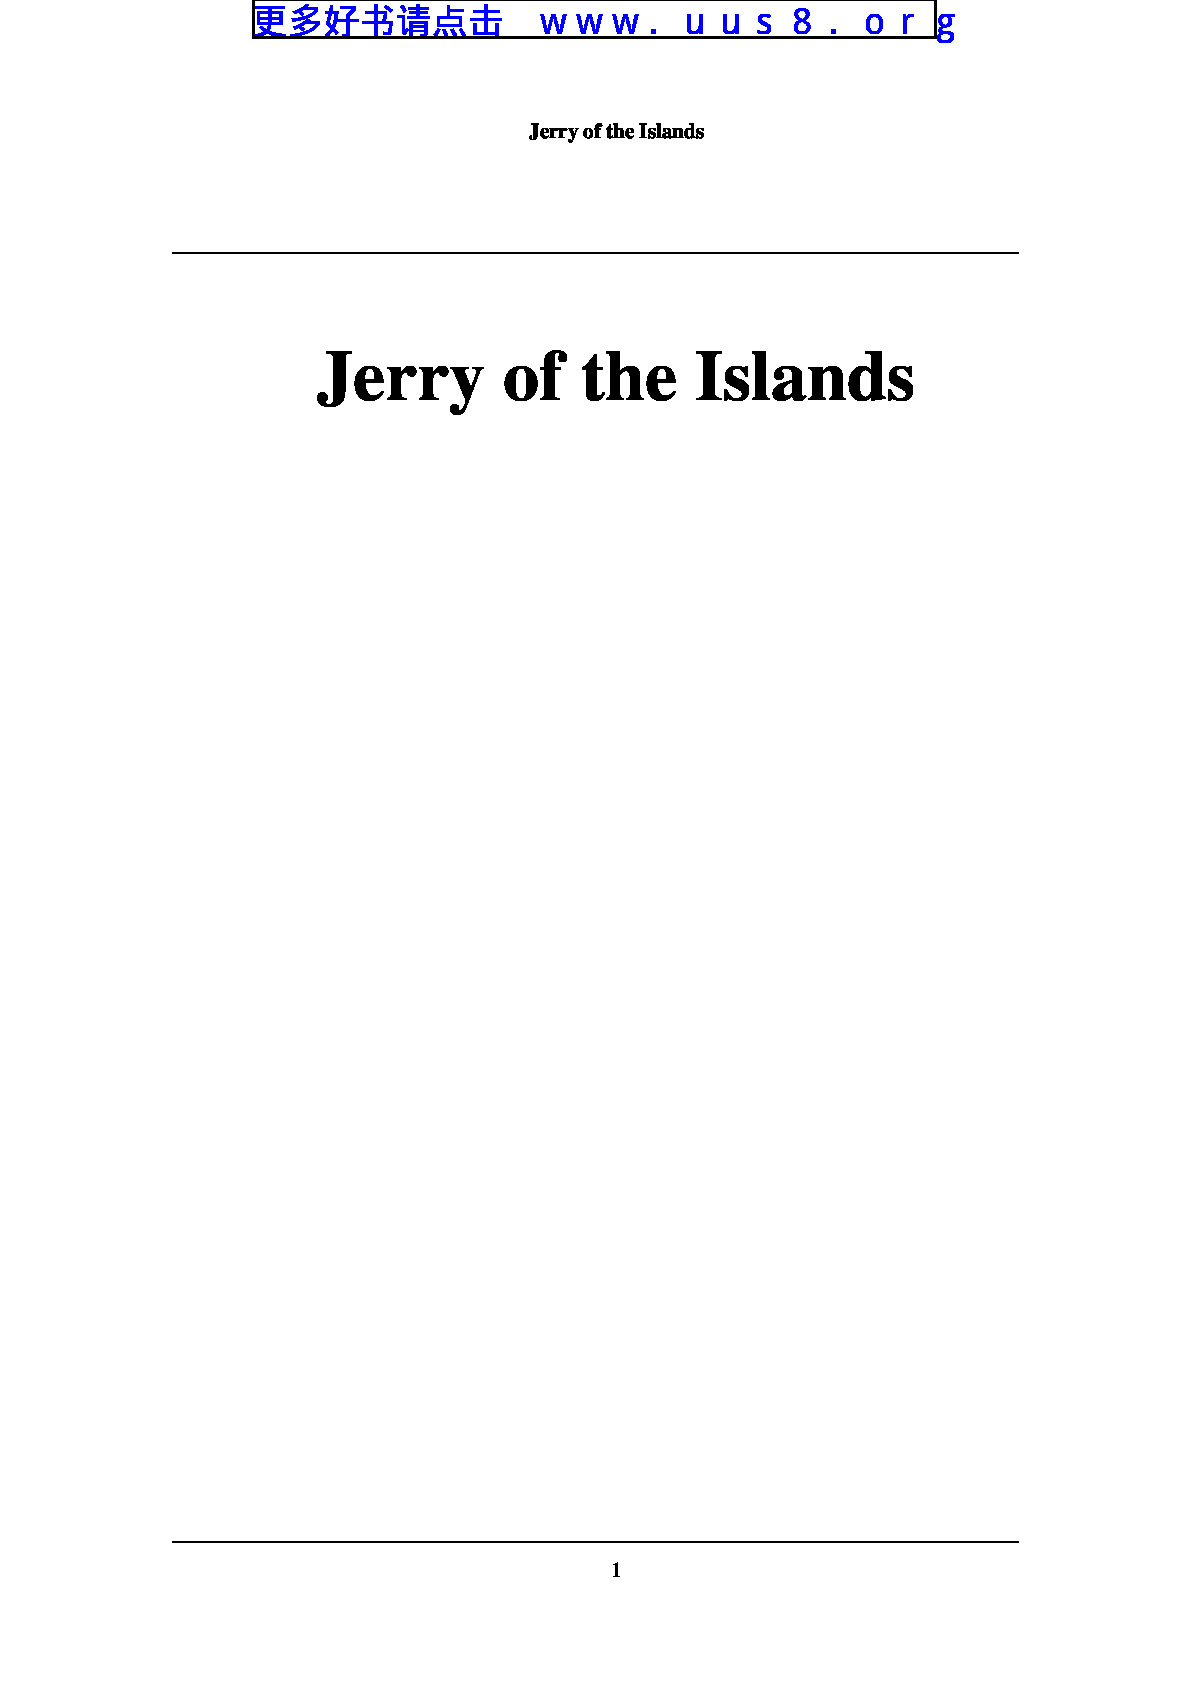 Jerry_of_the_Islands(岛上的杰瑞)